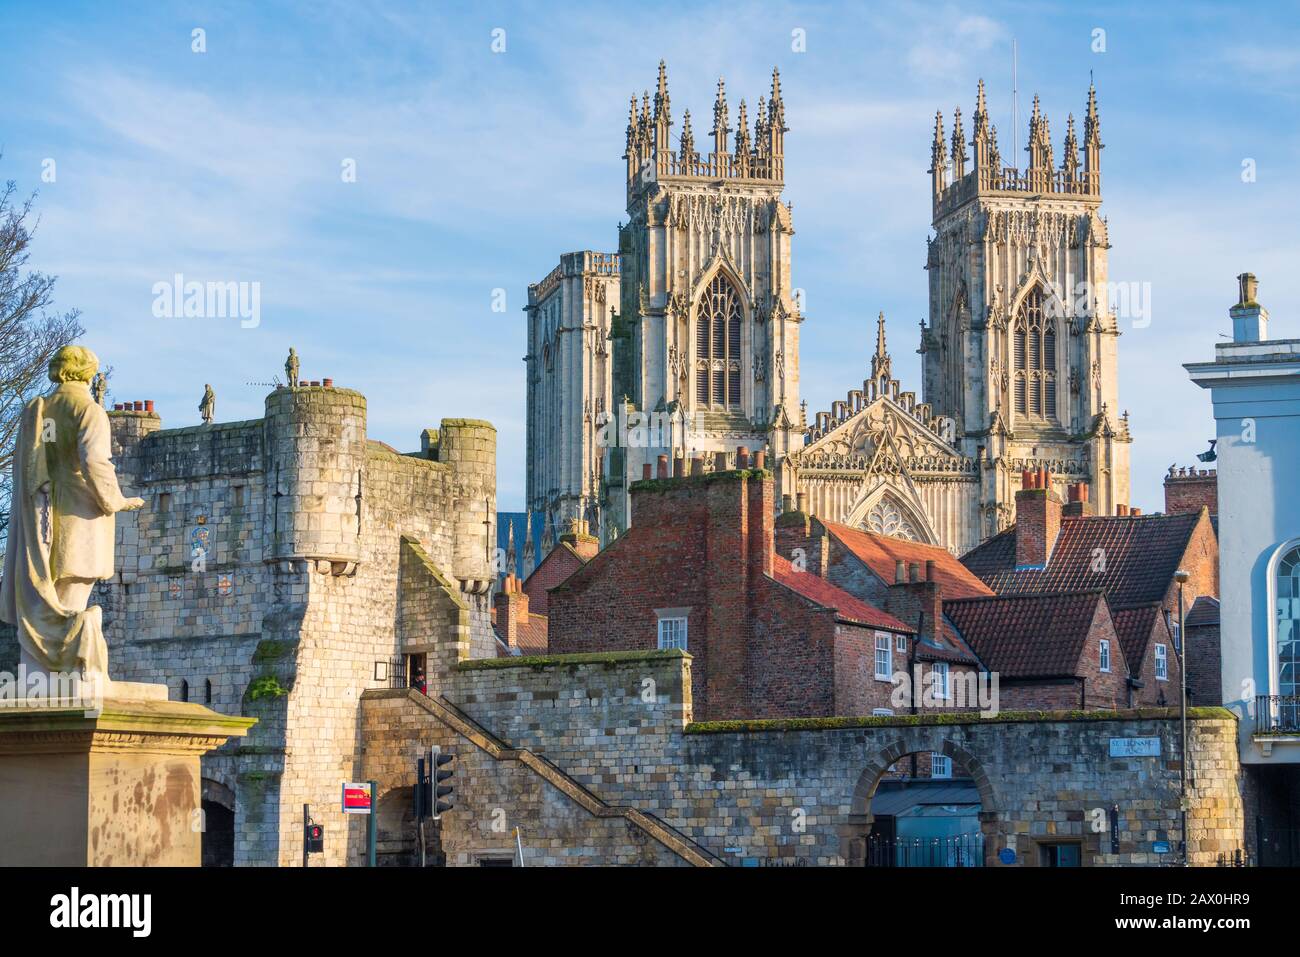 York Minster West Bell Towers, rooftops and Bootham Bar, St Leonards Place, York, UK. Stock Photo